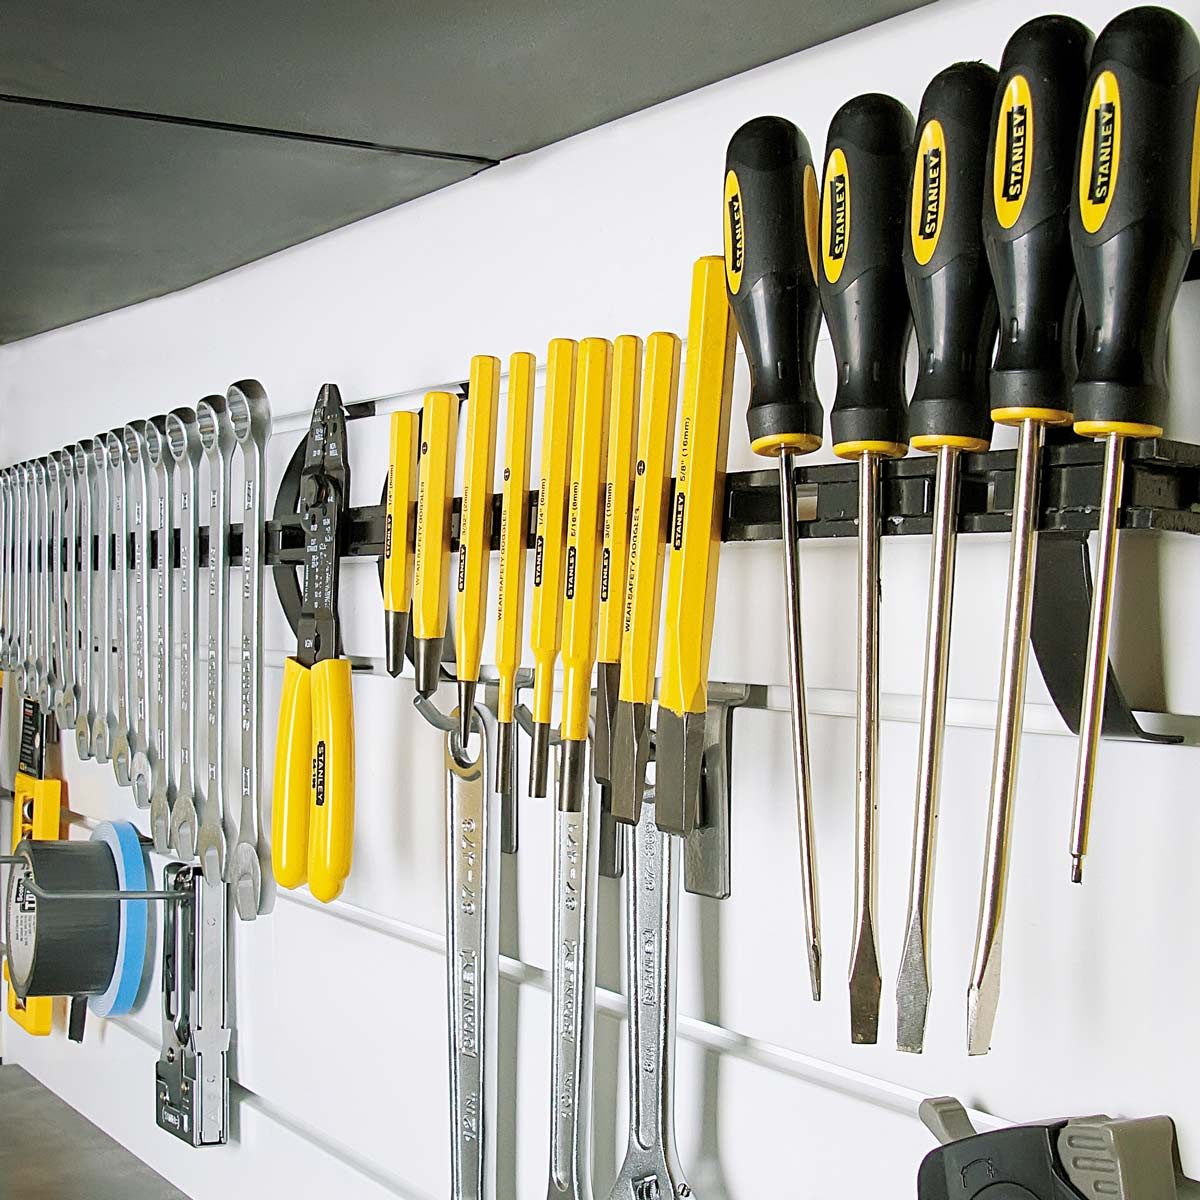 10 Tips for Organizing Your Garage and Keeping It Organized